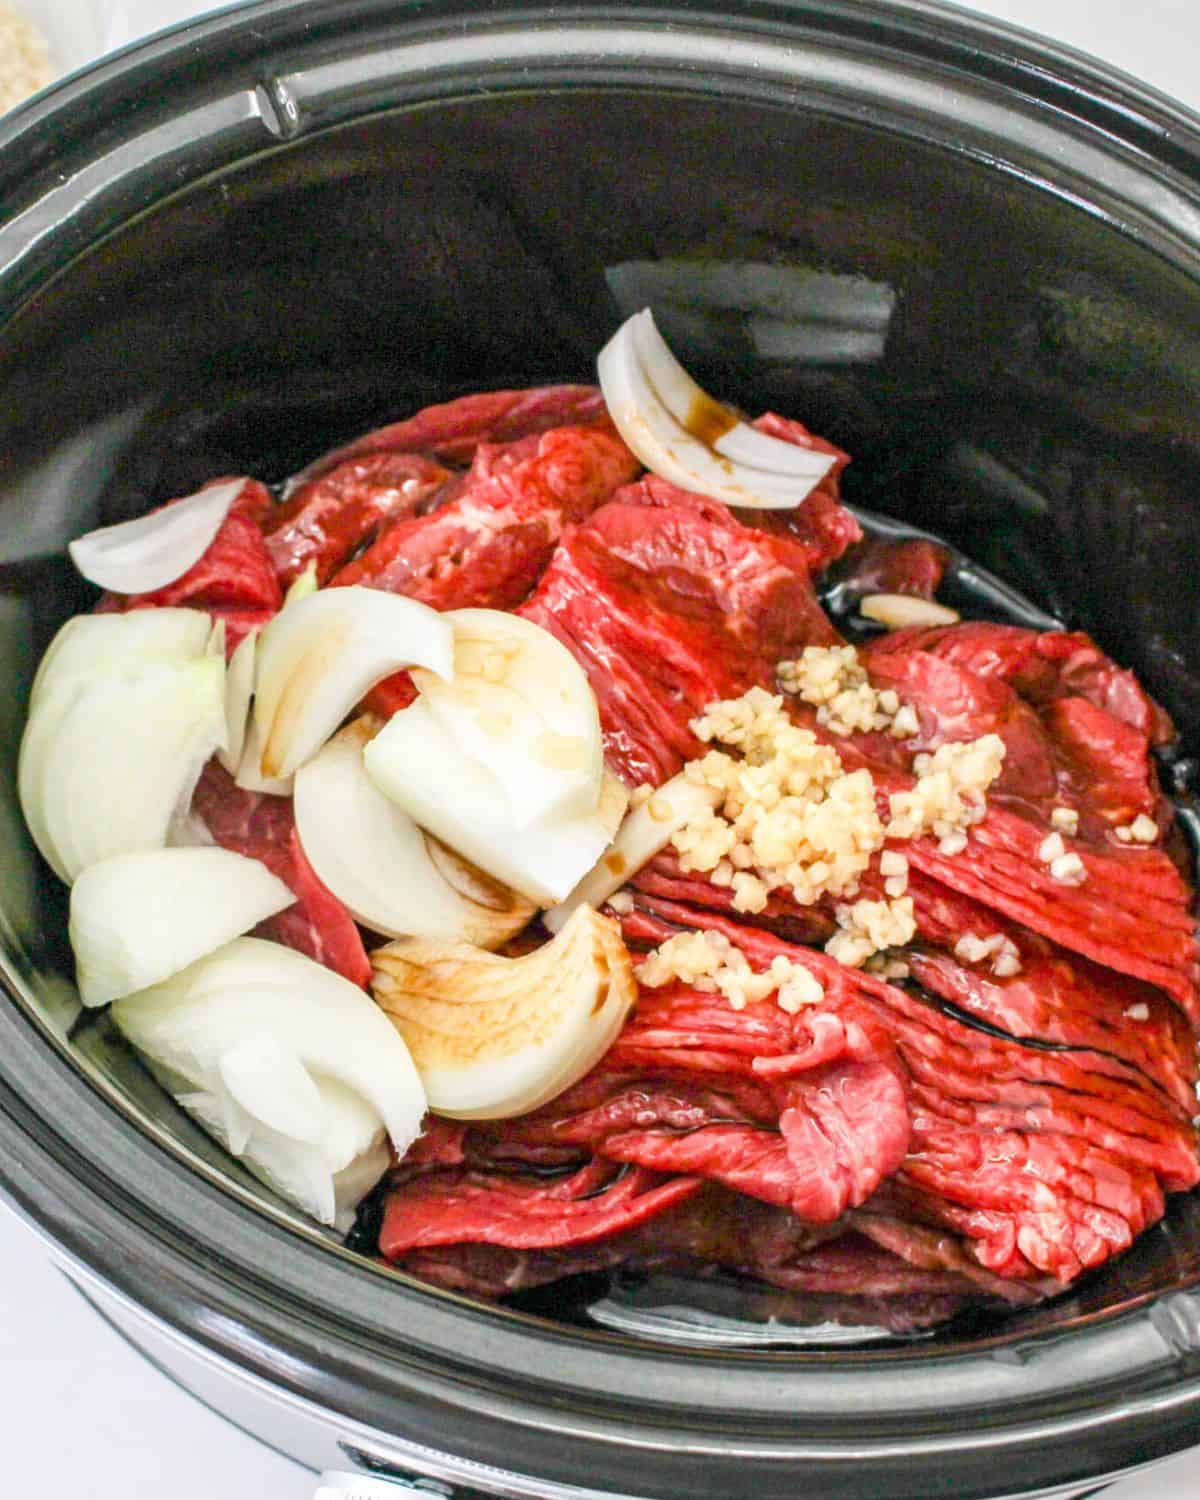 A Slow cooker with beef, onions, garlic, and sauce in the pot.